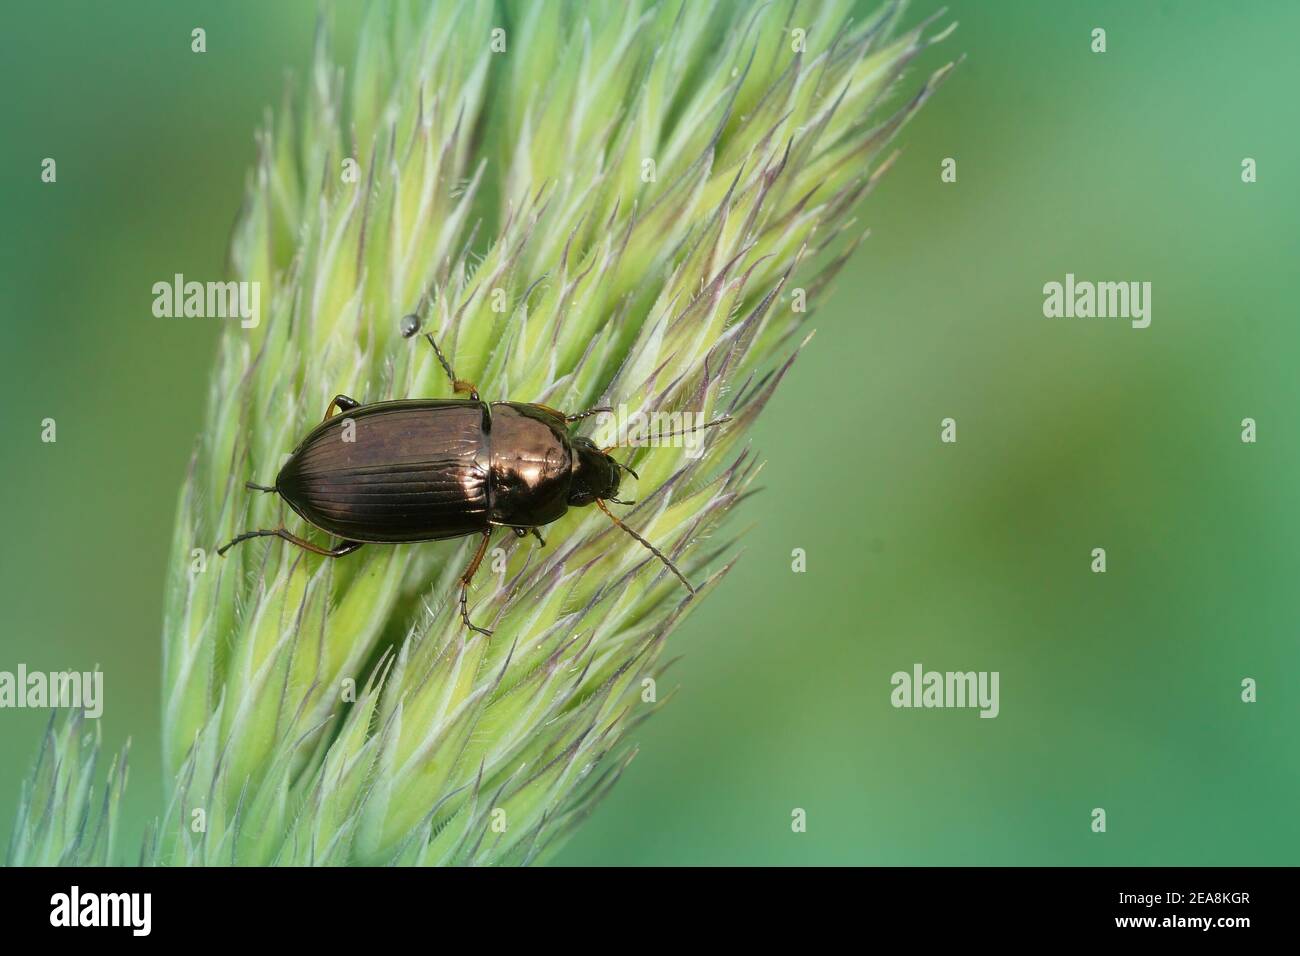 One of the ground beetles , Amara , on a grass blade Stock Photo